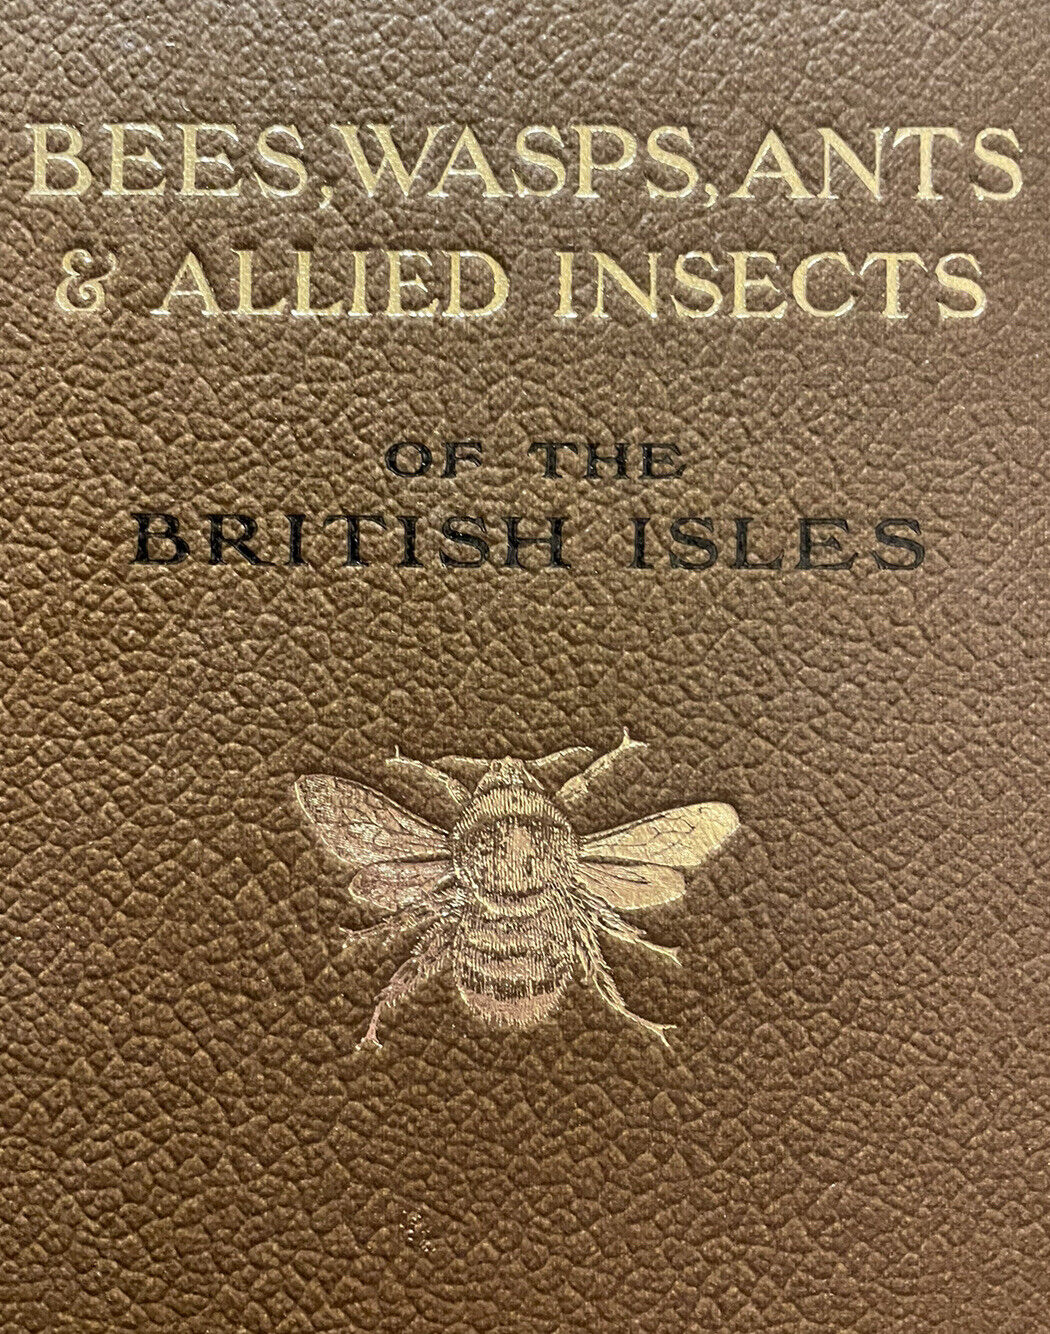 1932 Bees Wasps Ants &amp; Allied Insects : Edward Step : Wayside &amp; Woodland Series